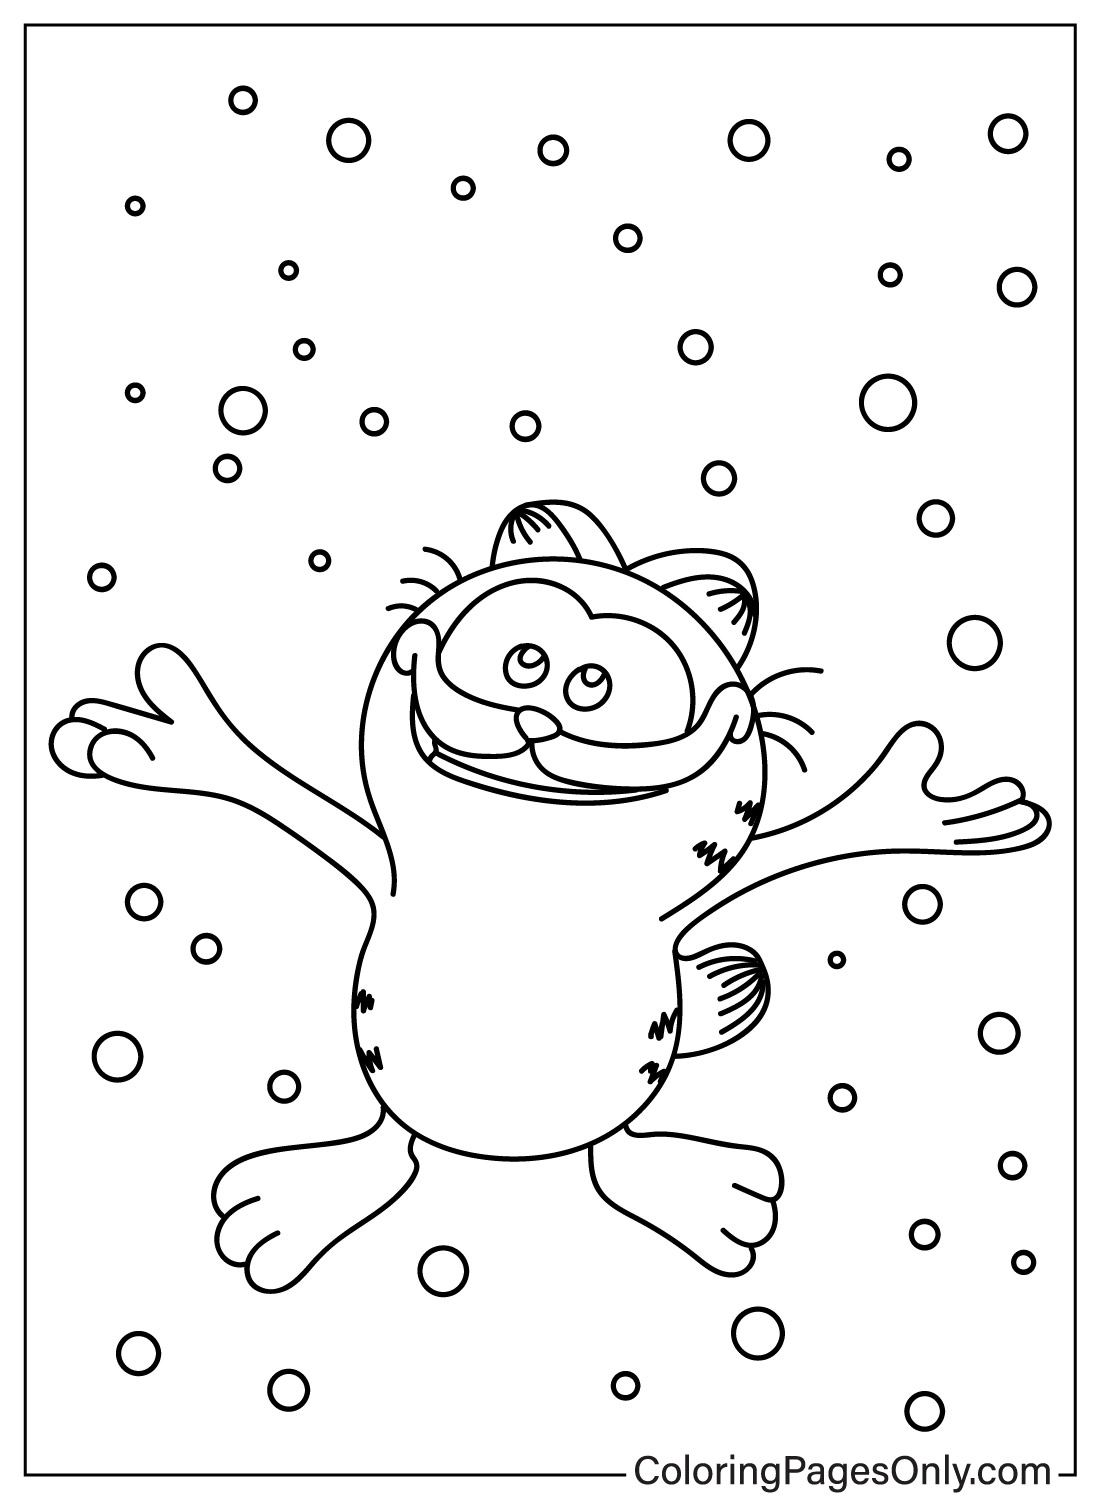 Images Garfield Coloring Page from Garfield